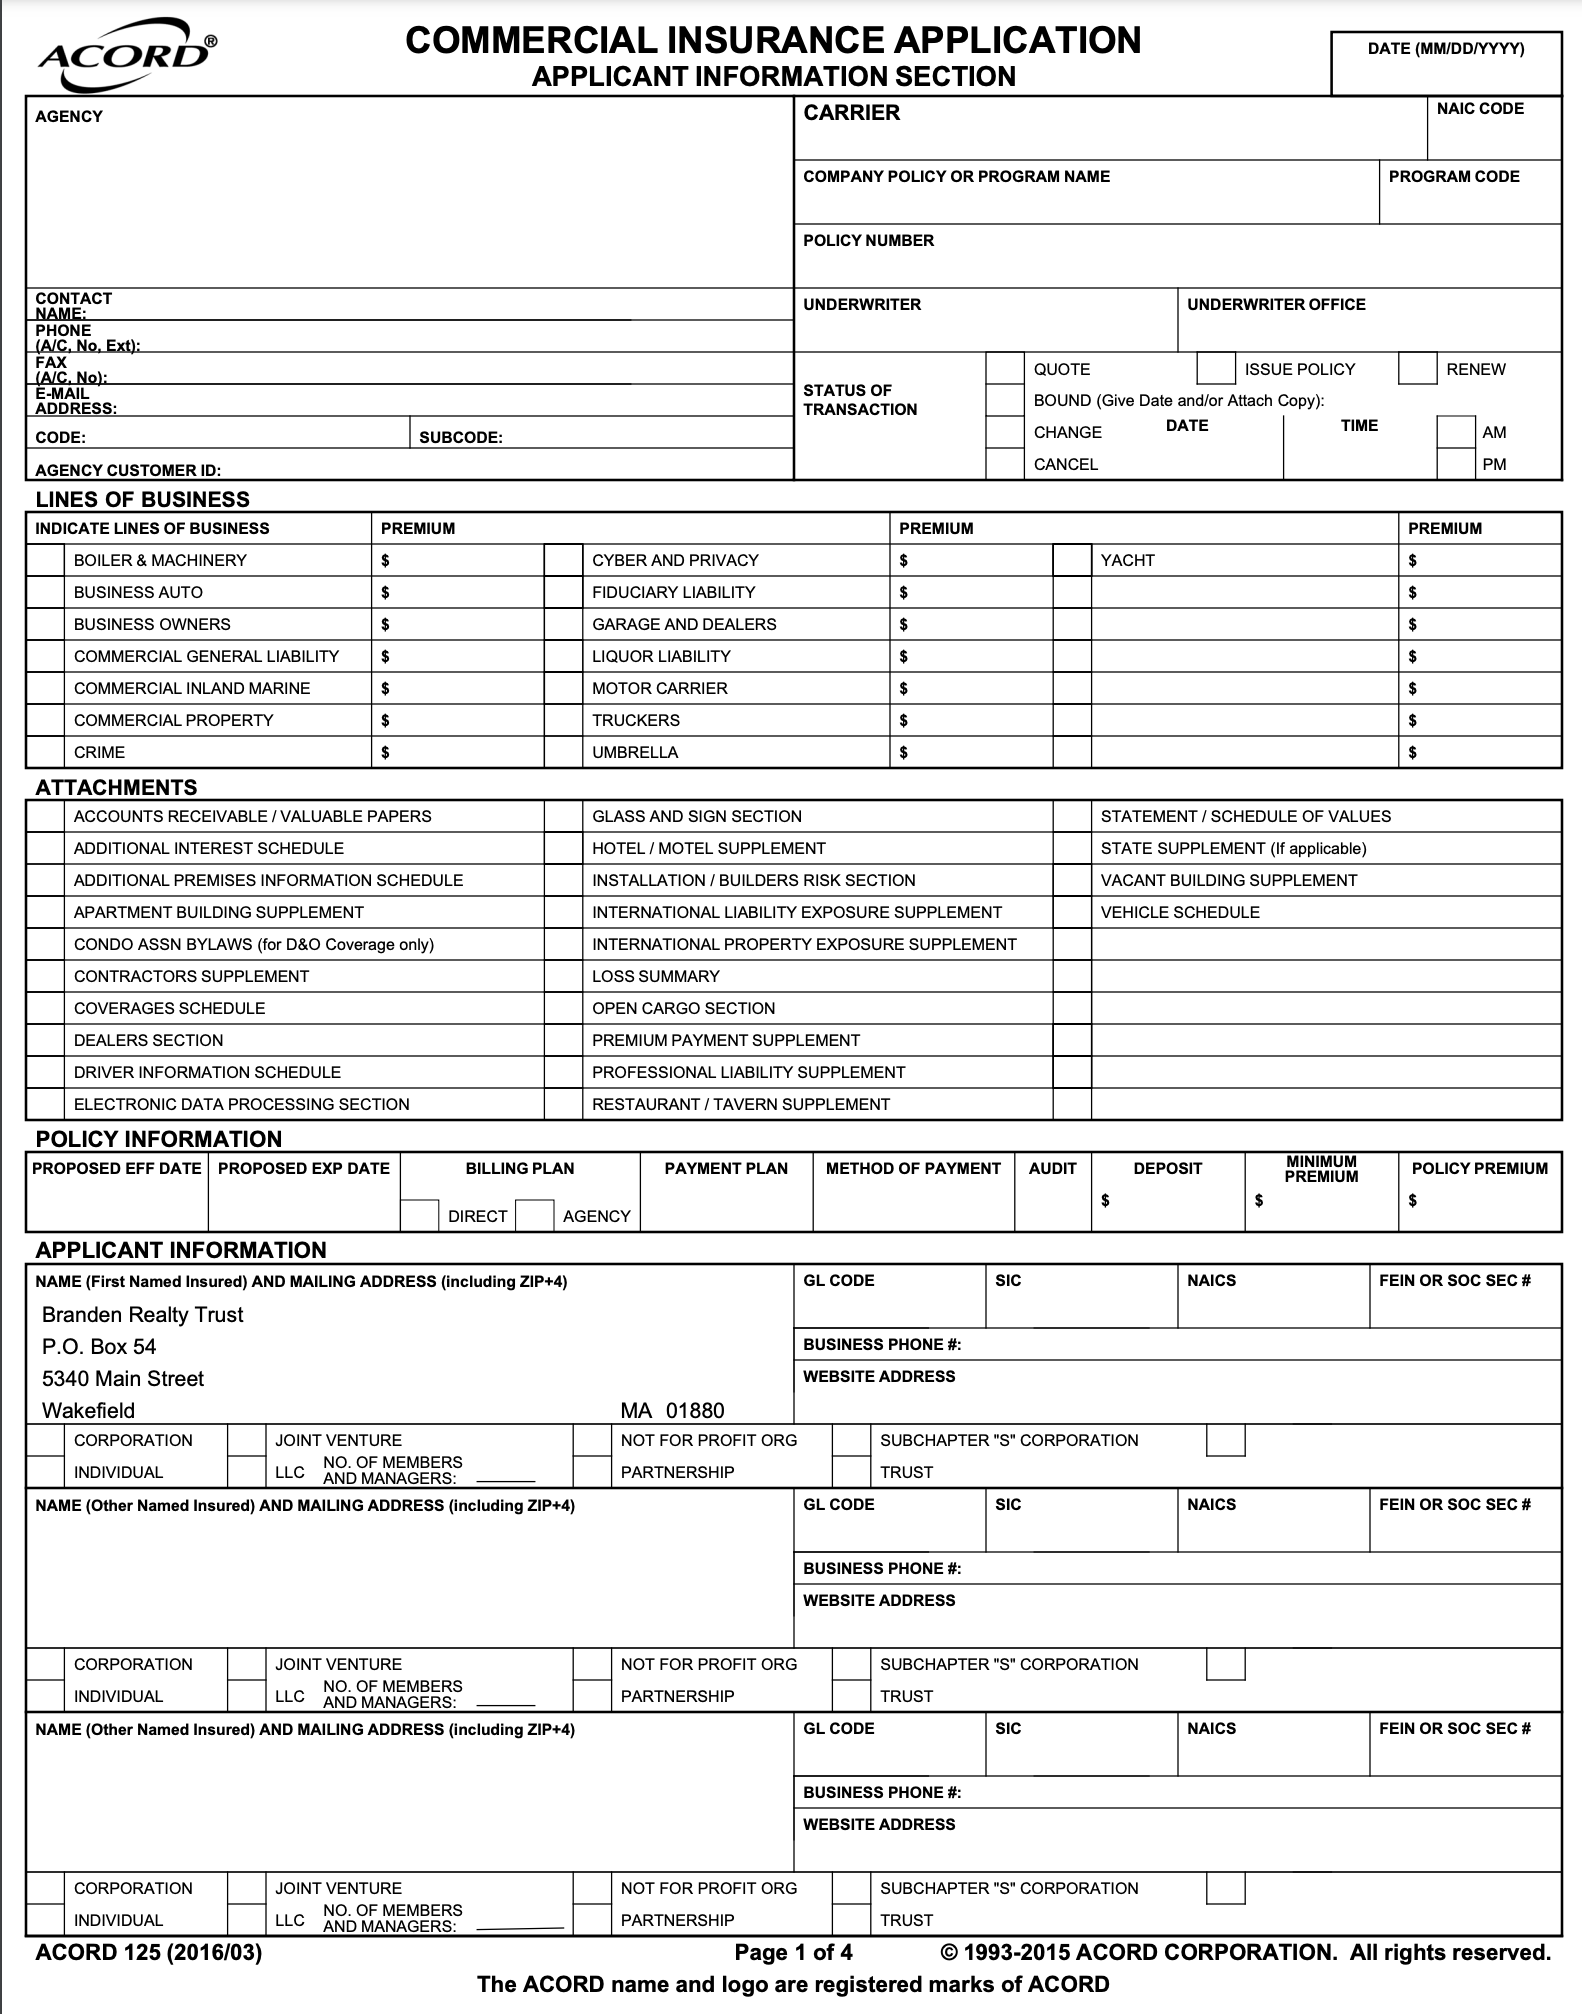 ACORD Form 125